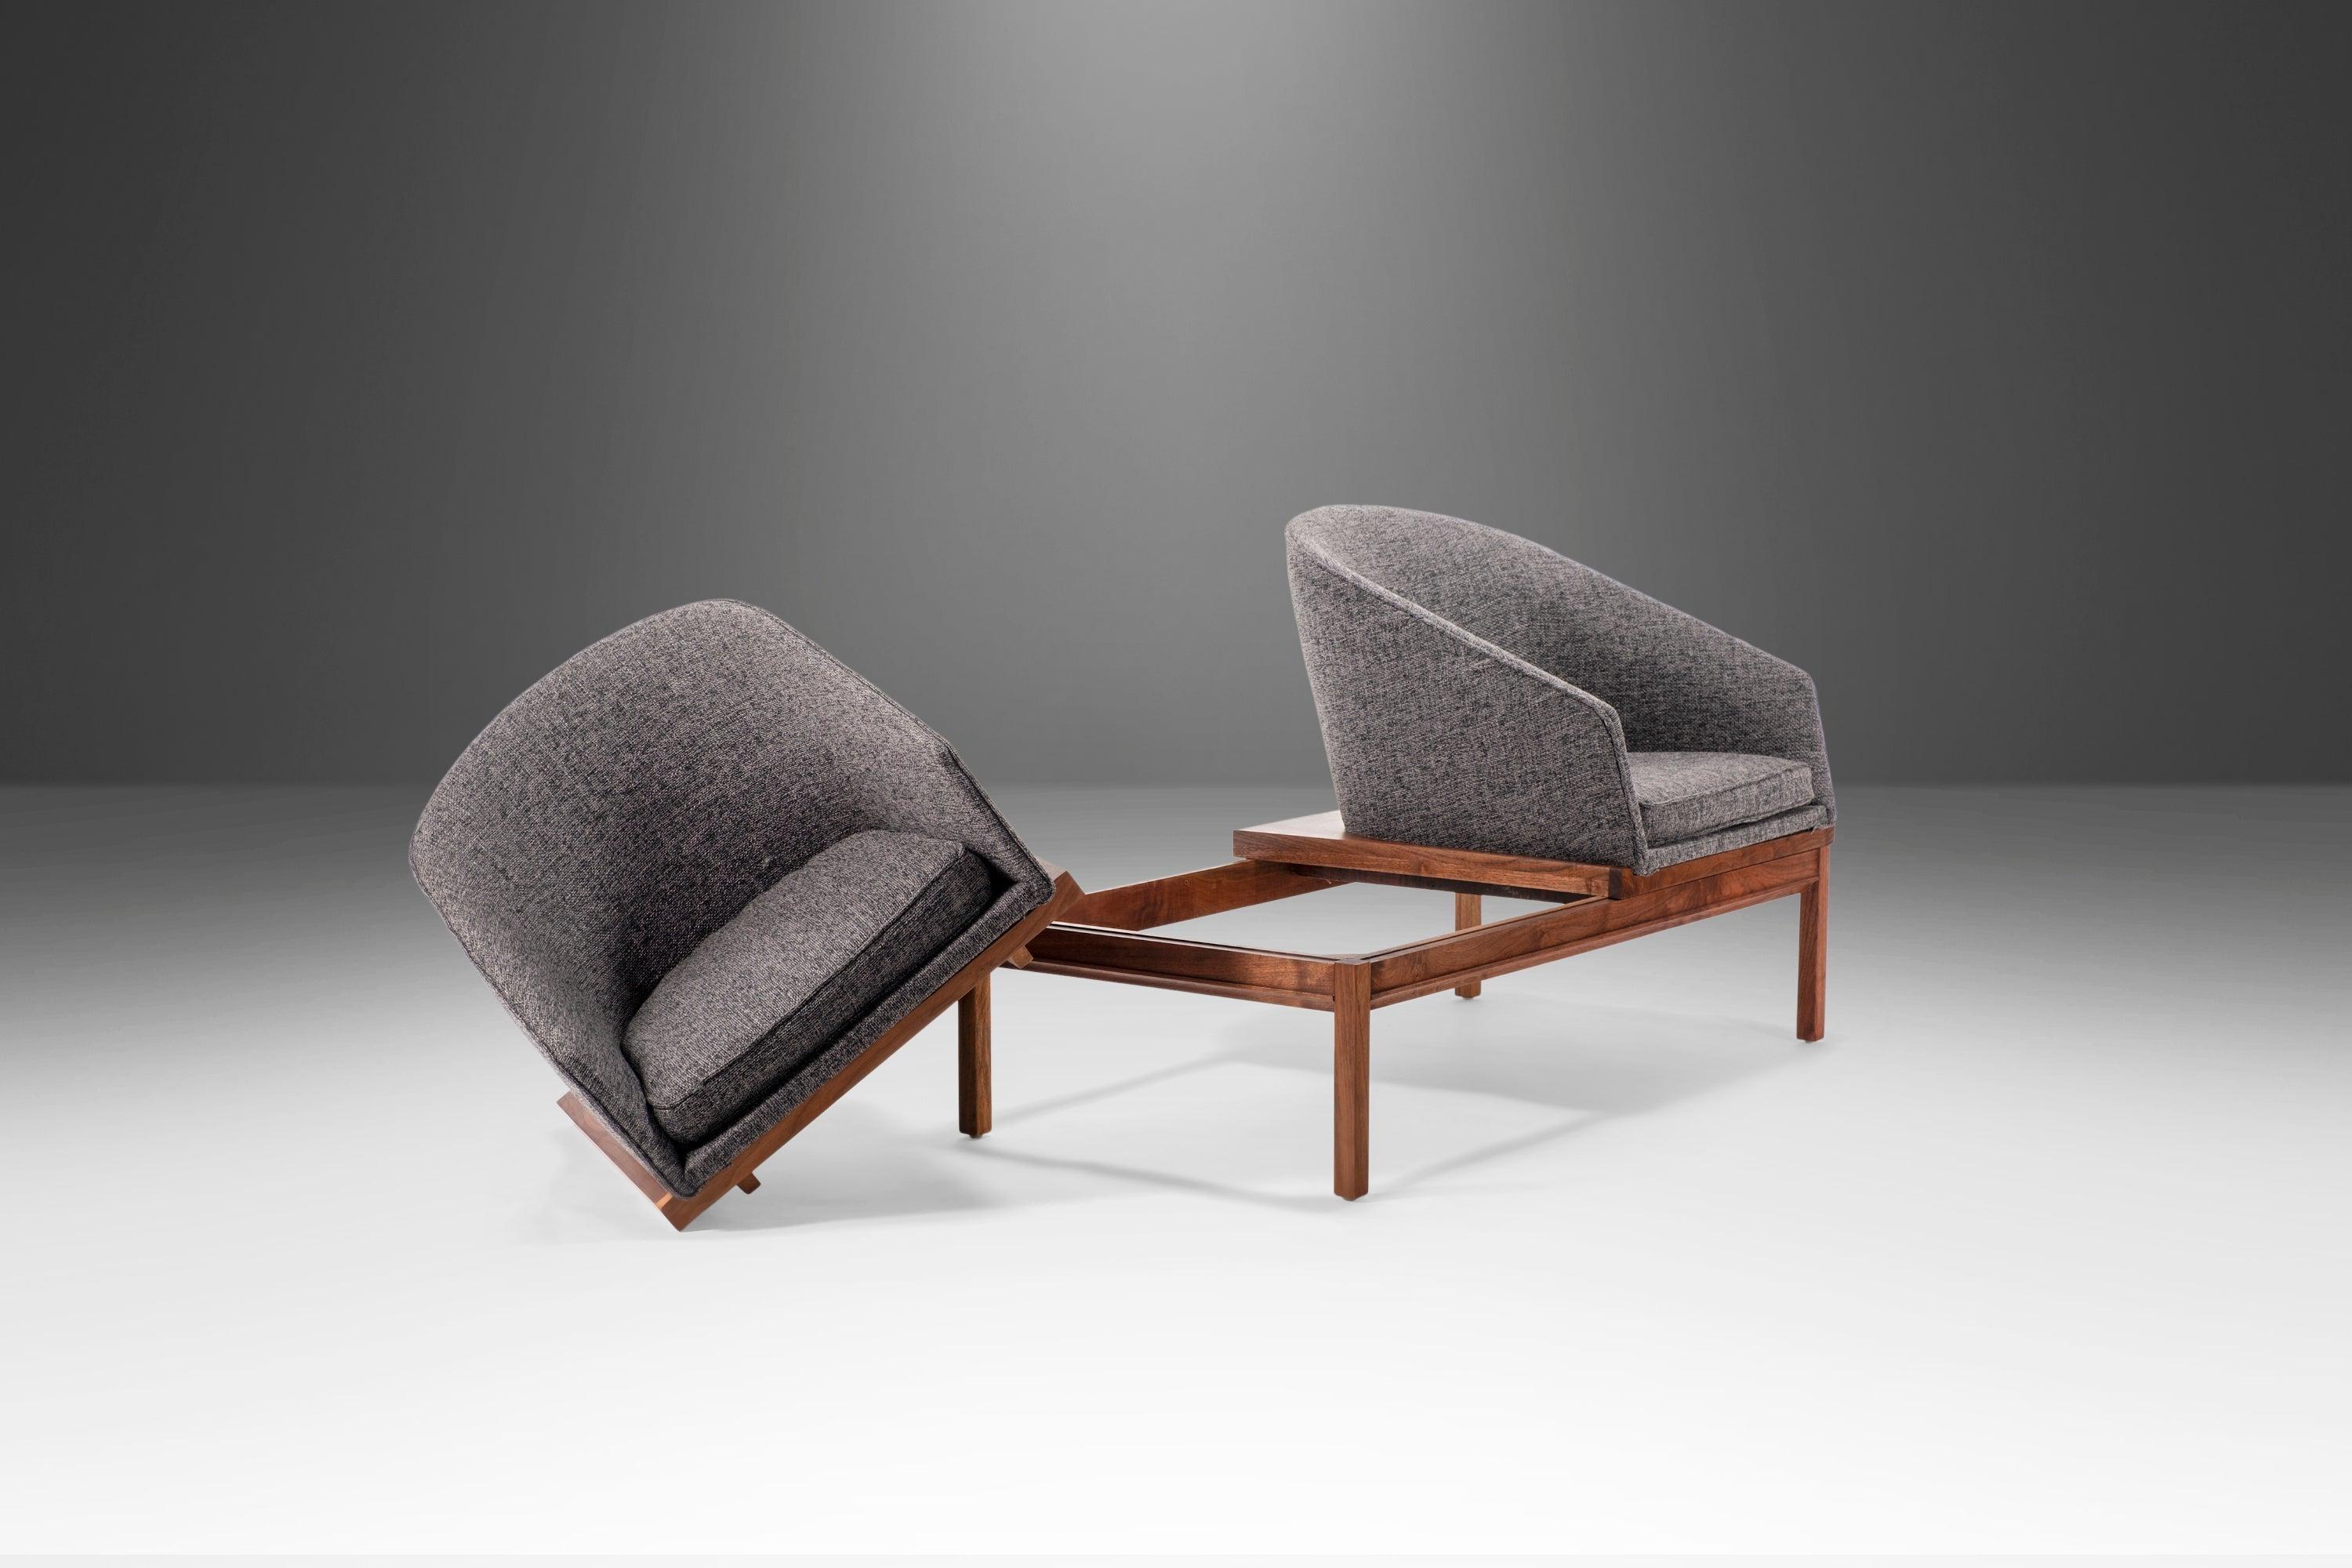 American Three (3) Seat & Two (2) Seat Modular Benches Attributed to Arthur Umanoff, 1960